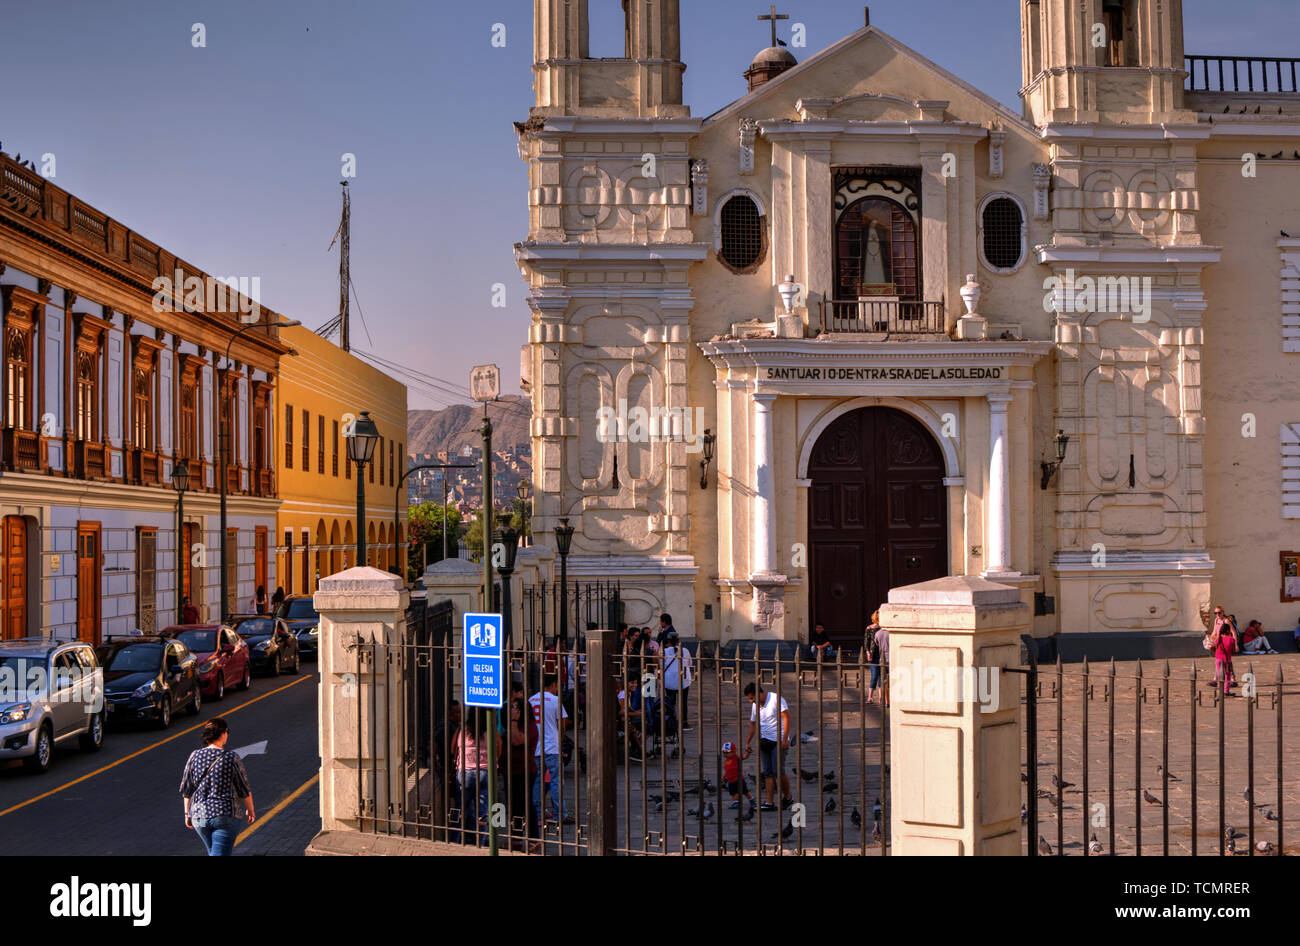 Lima, Peru - April 21, 2018: Sanctuary of Our Lady of Solitude church with locals and tourists outside Stock Photo